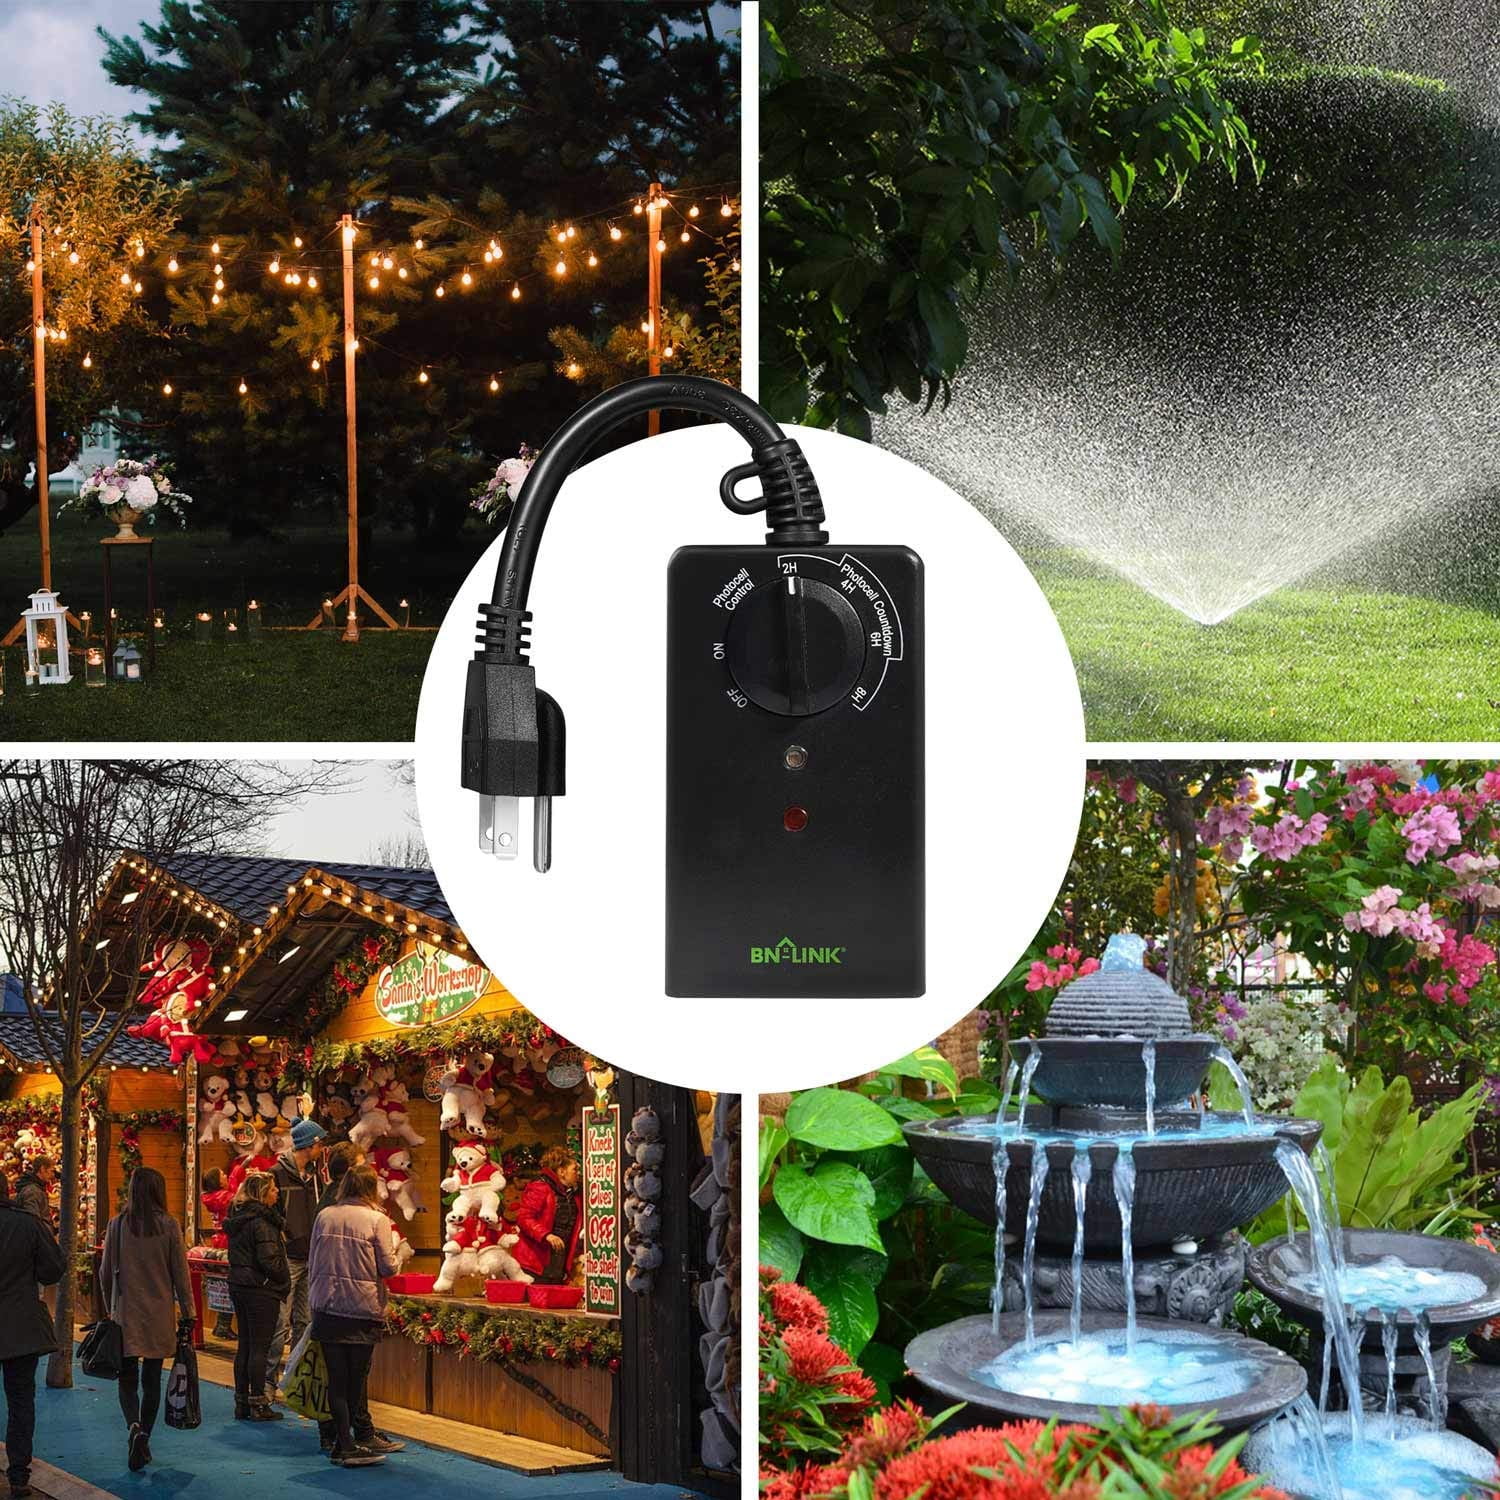 Century Outdoor 24-Hour Timer with Photocell Light Sensor, Weatherproof, Two Gro